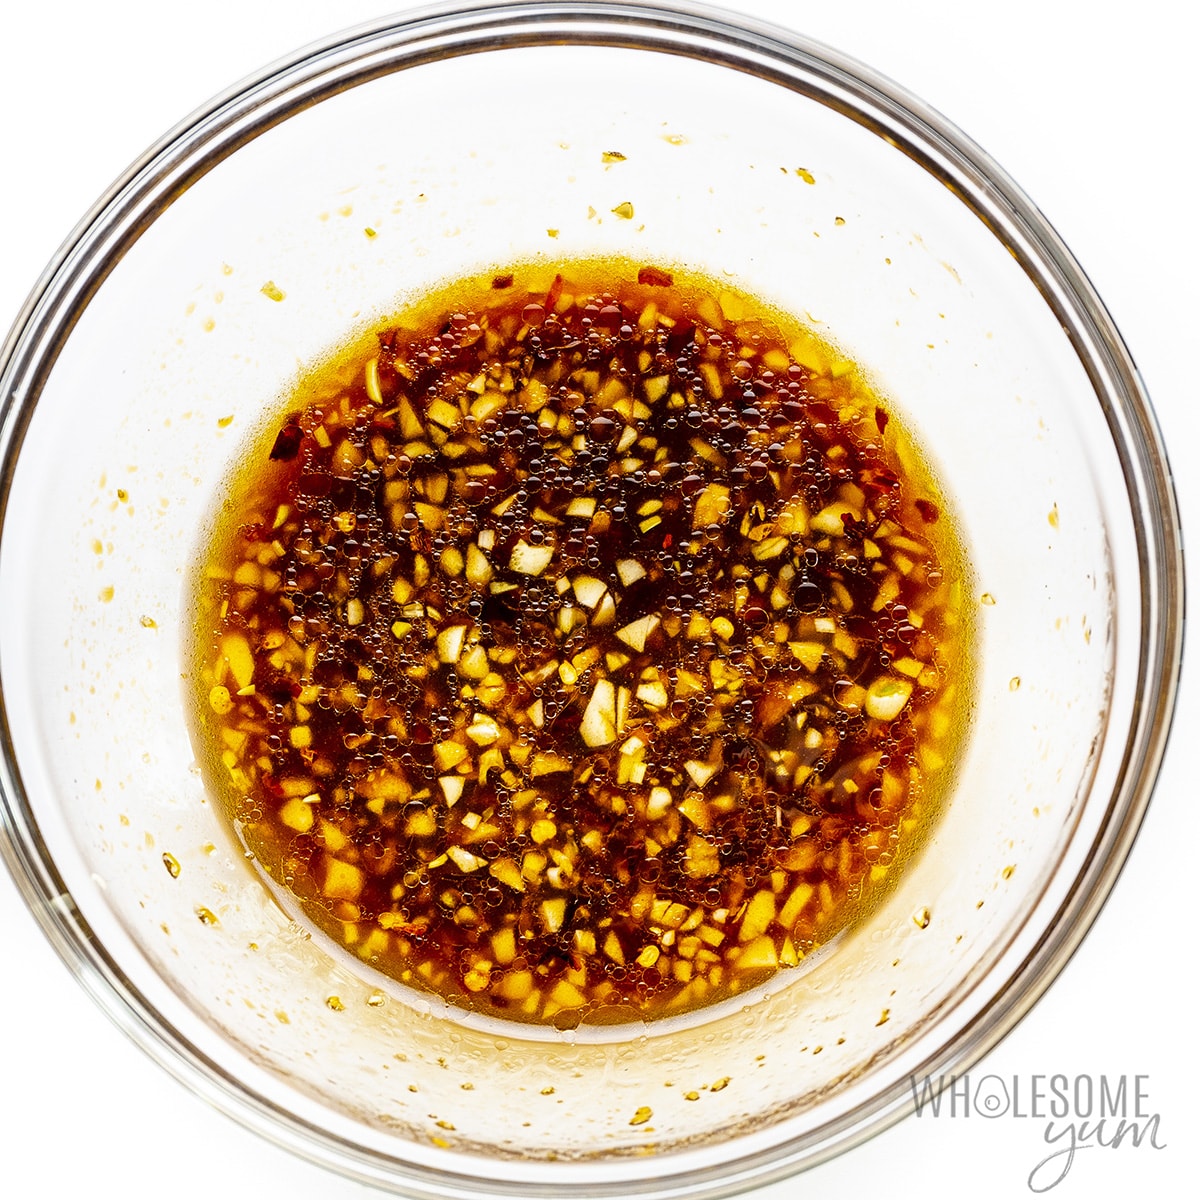 Marinade ingredients whisked together in a bowl.